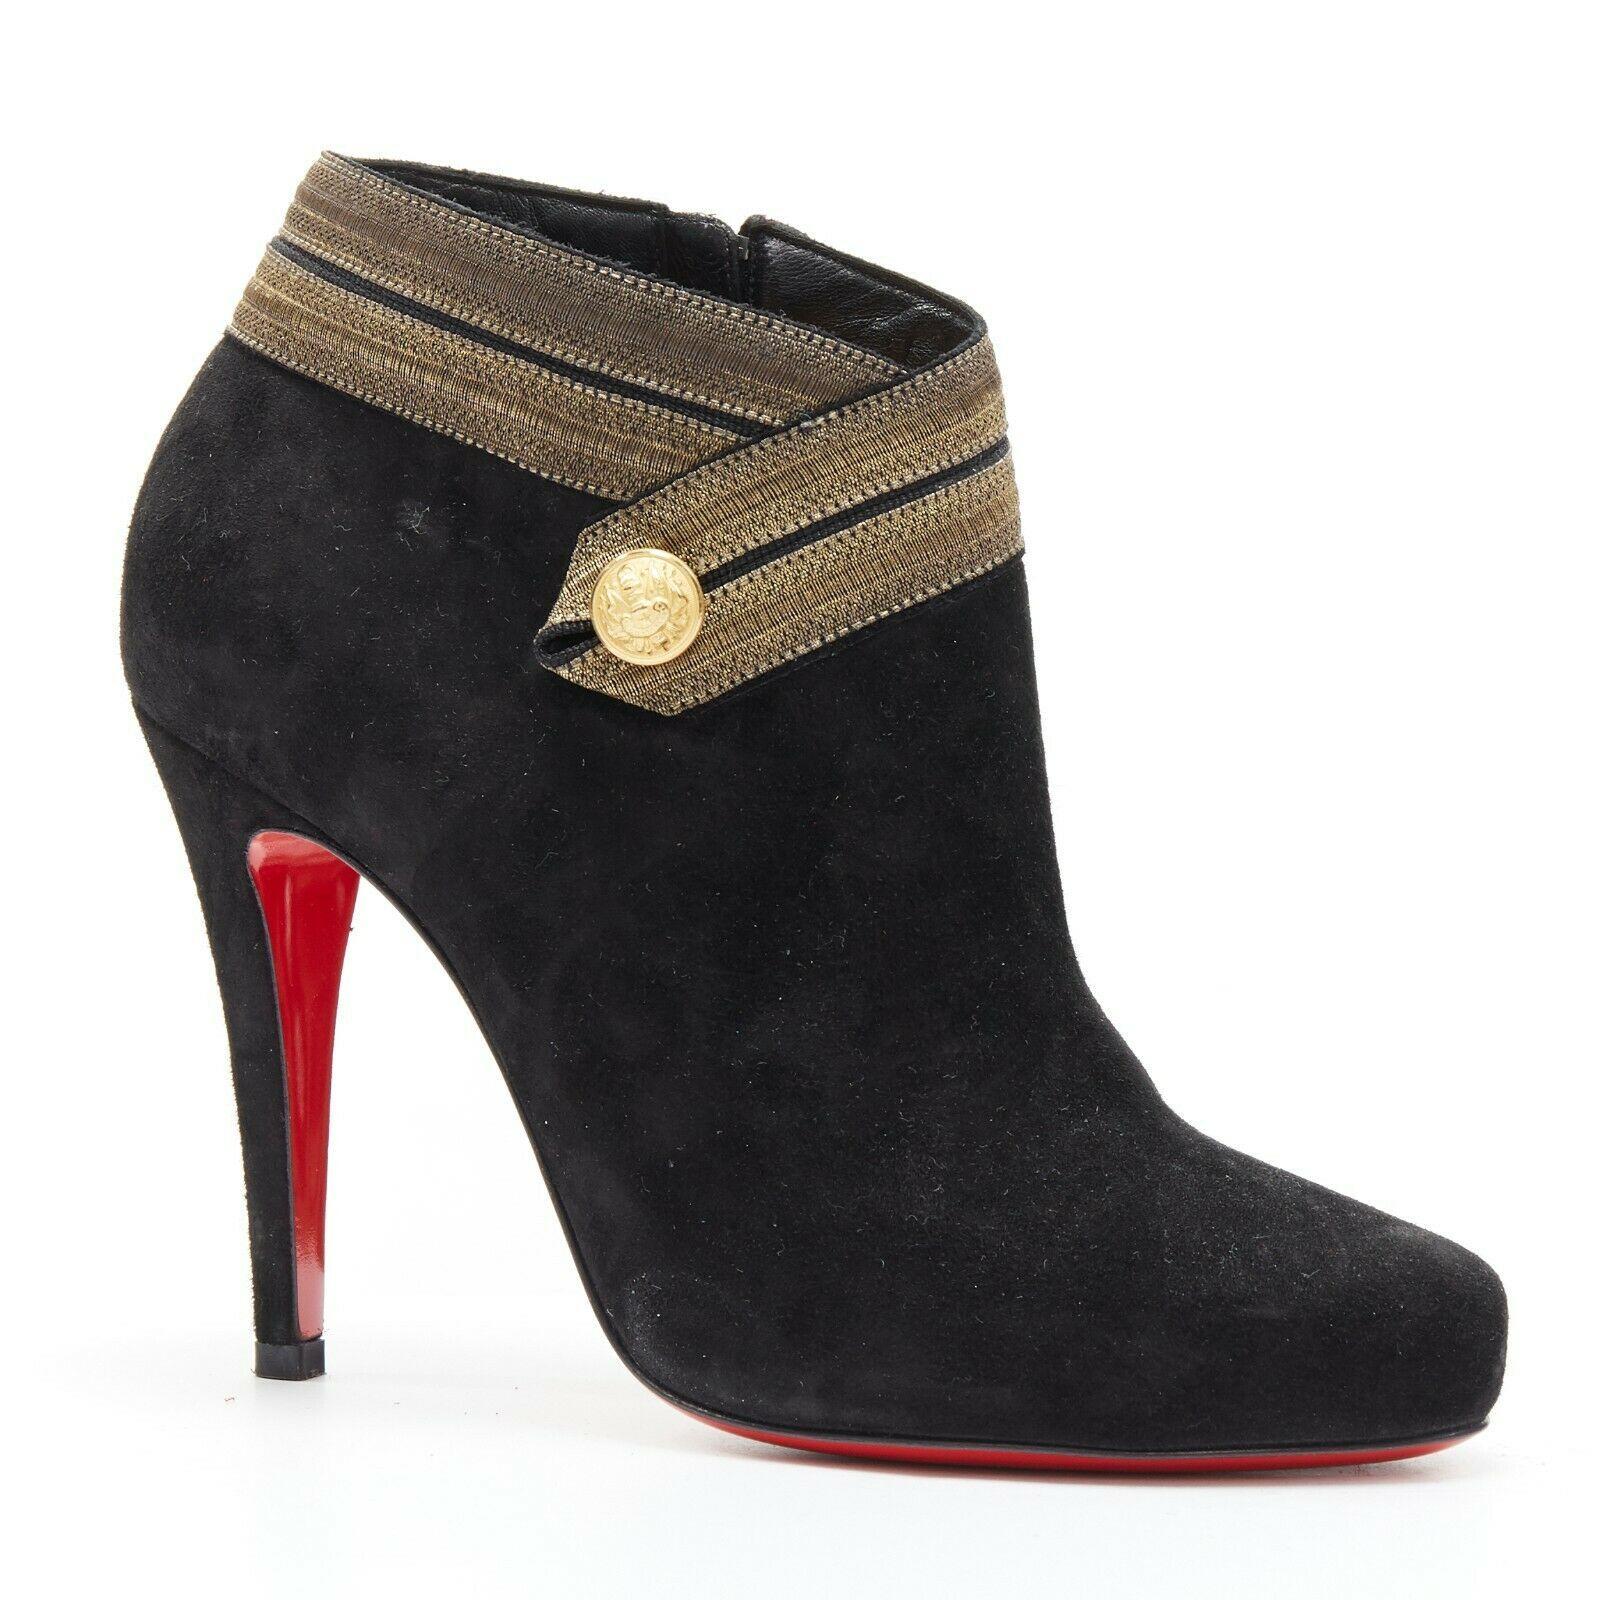 new CHRISTIAN LOUBOUTIN Marychal 100 black suede gold military trim bootie EU38
CHRISTIAN LOUBOUTIN
Marychal 100. 
Black suede leather upper. 
Gold embroidery trimming at opening. 
Gold-tone military decorative button. 
Almond round toe. 
Zipper